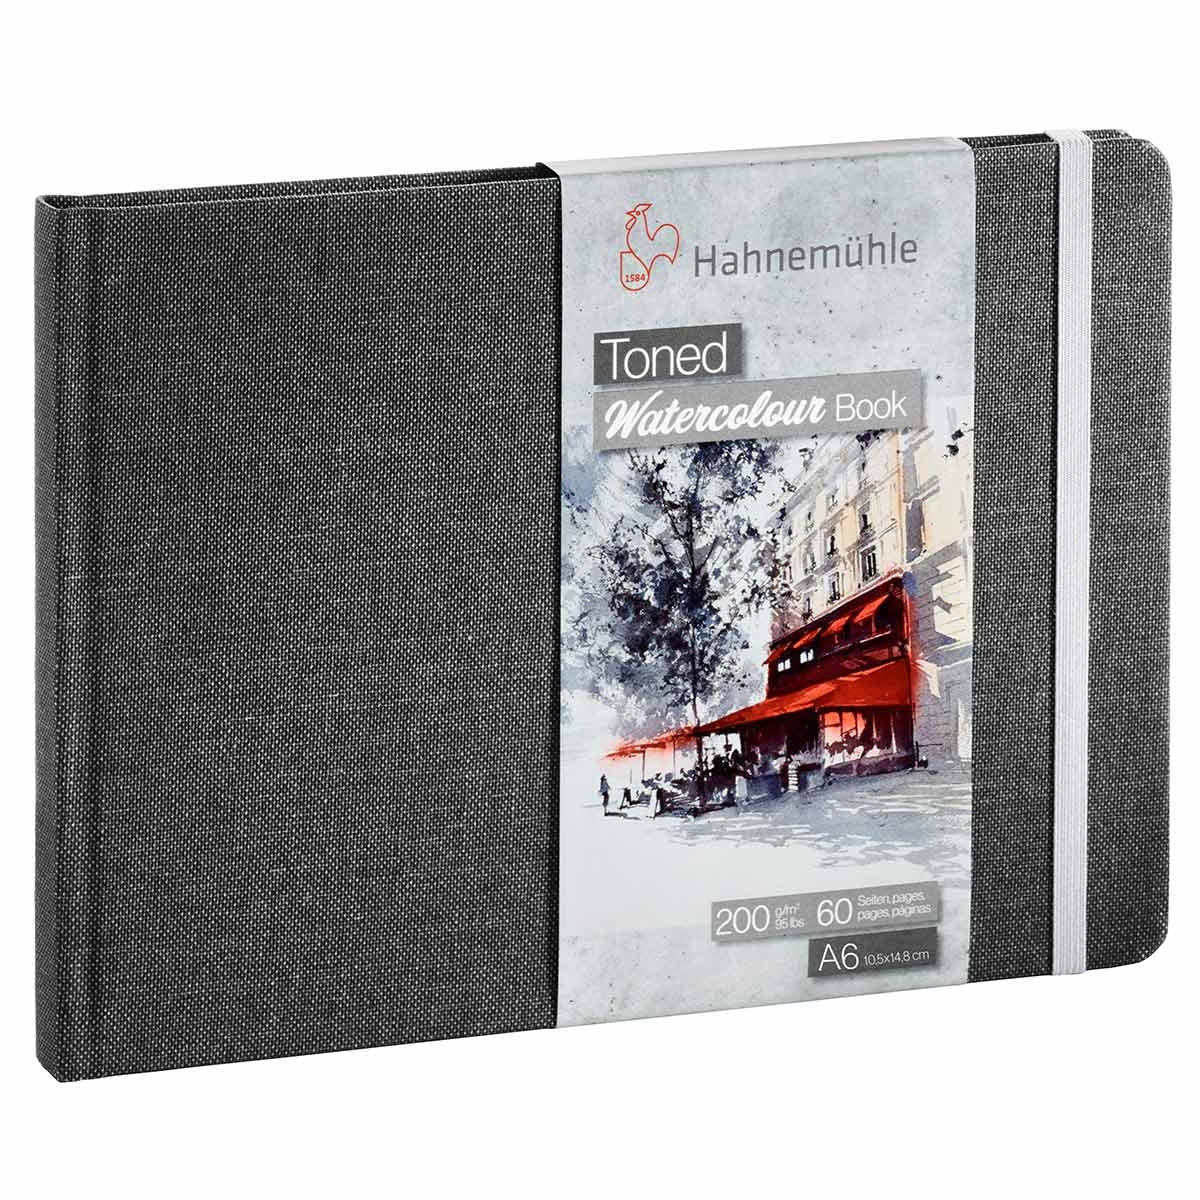 Hahnemuhle - Toned Watercolour Books - Grey A6